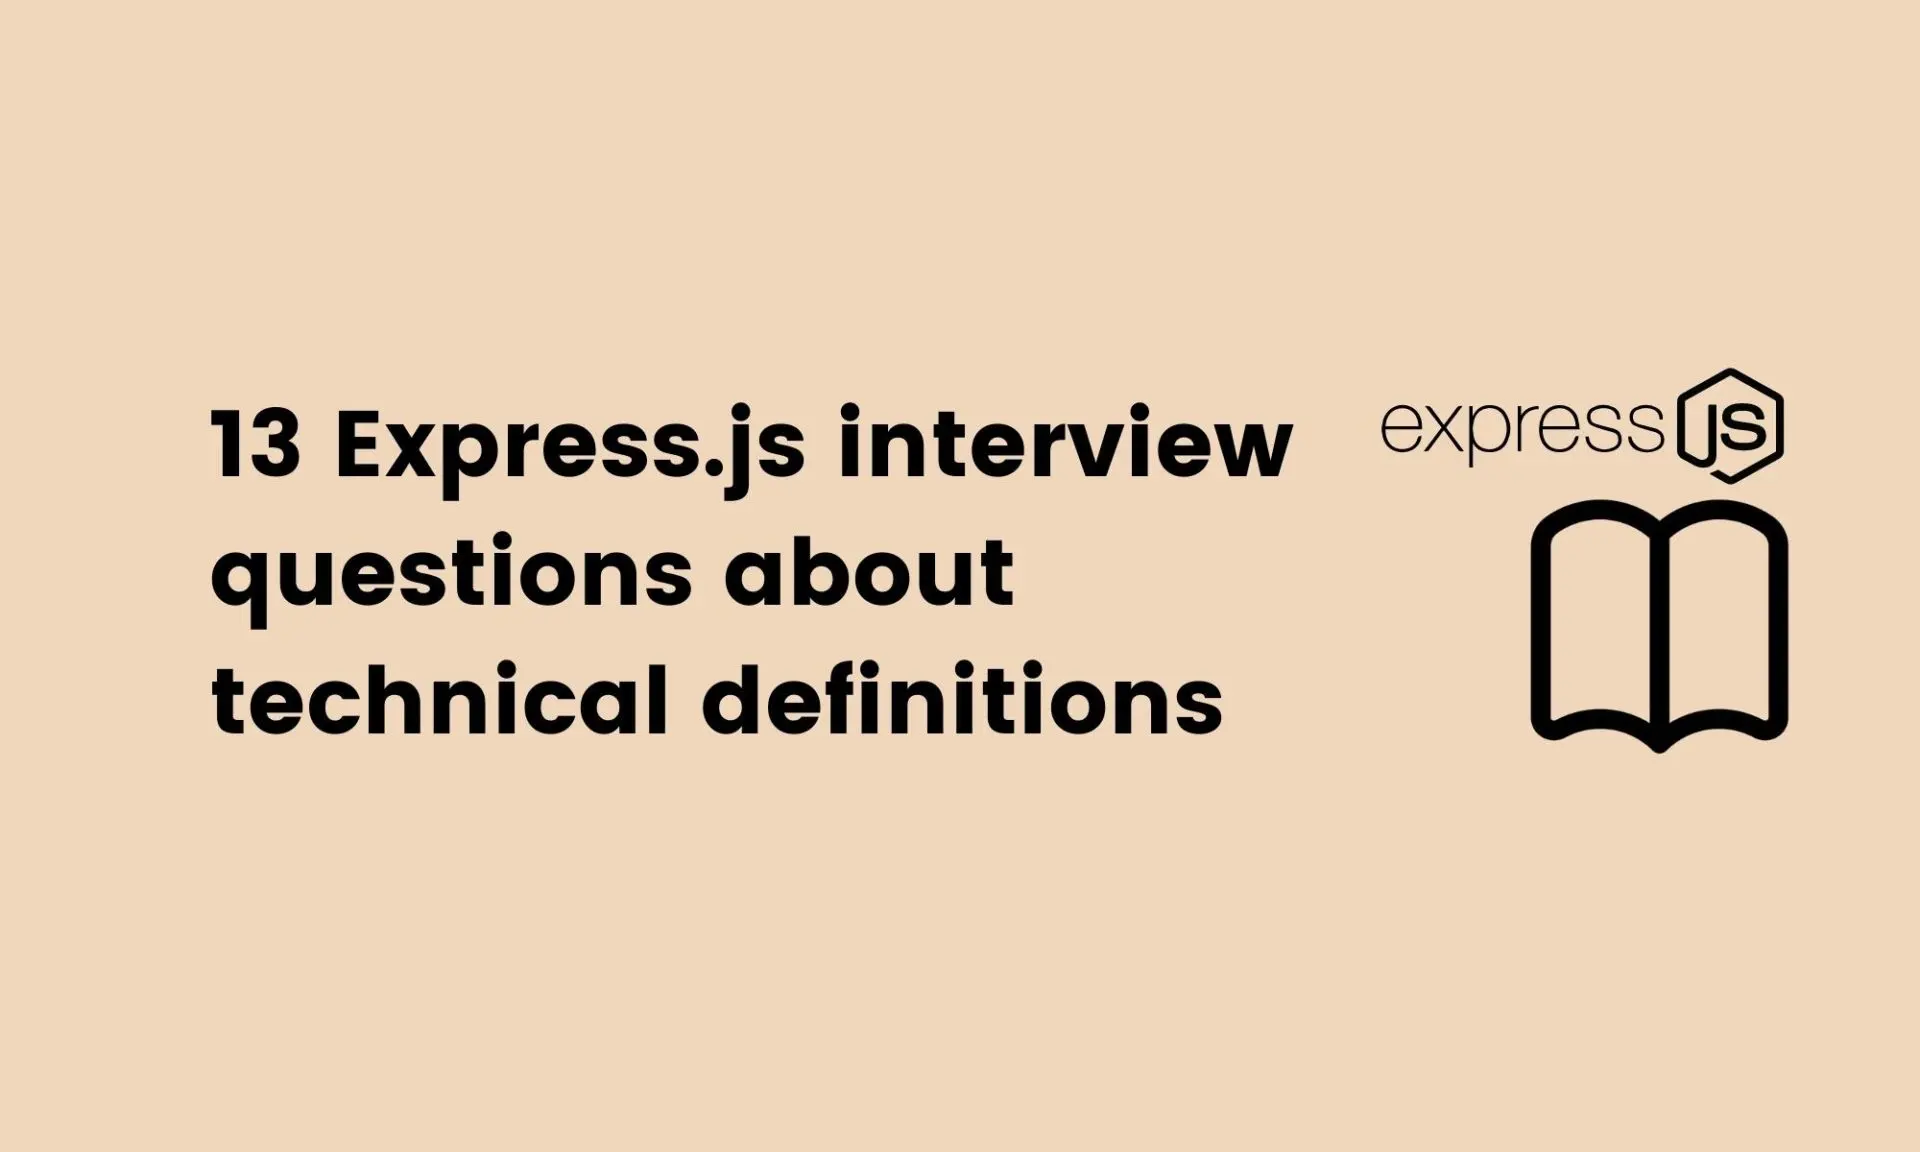 13 Express.js interview questions about technical definitions